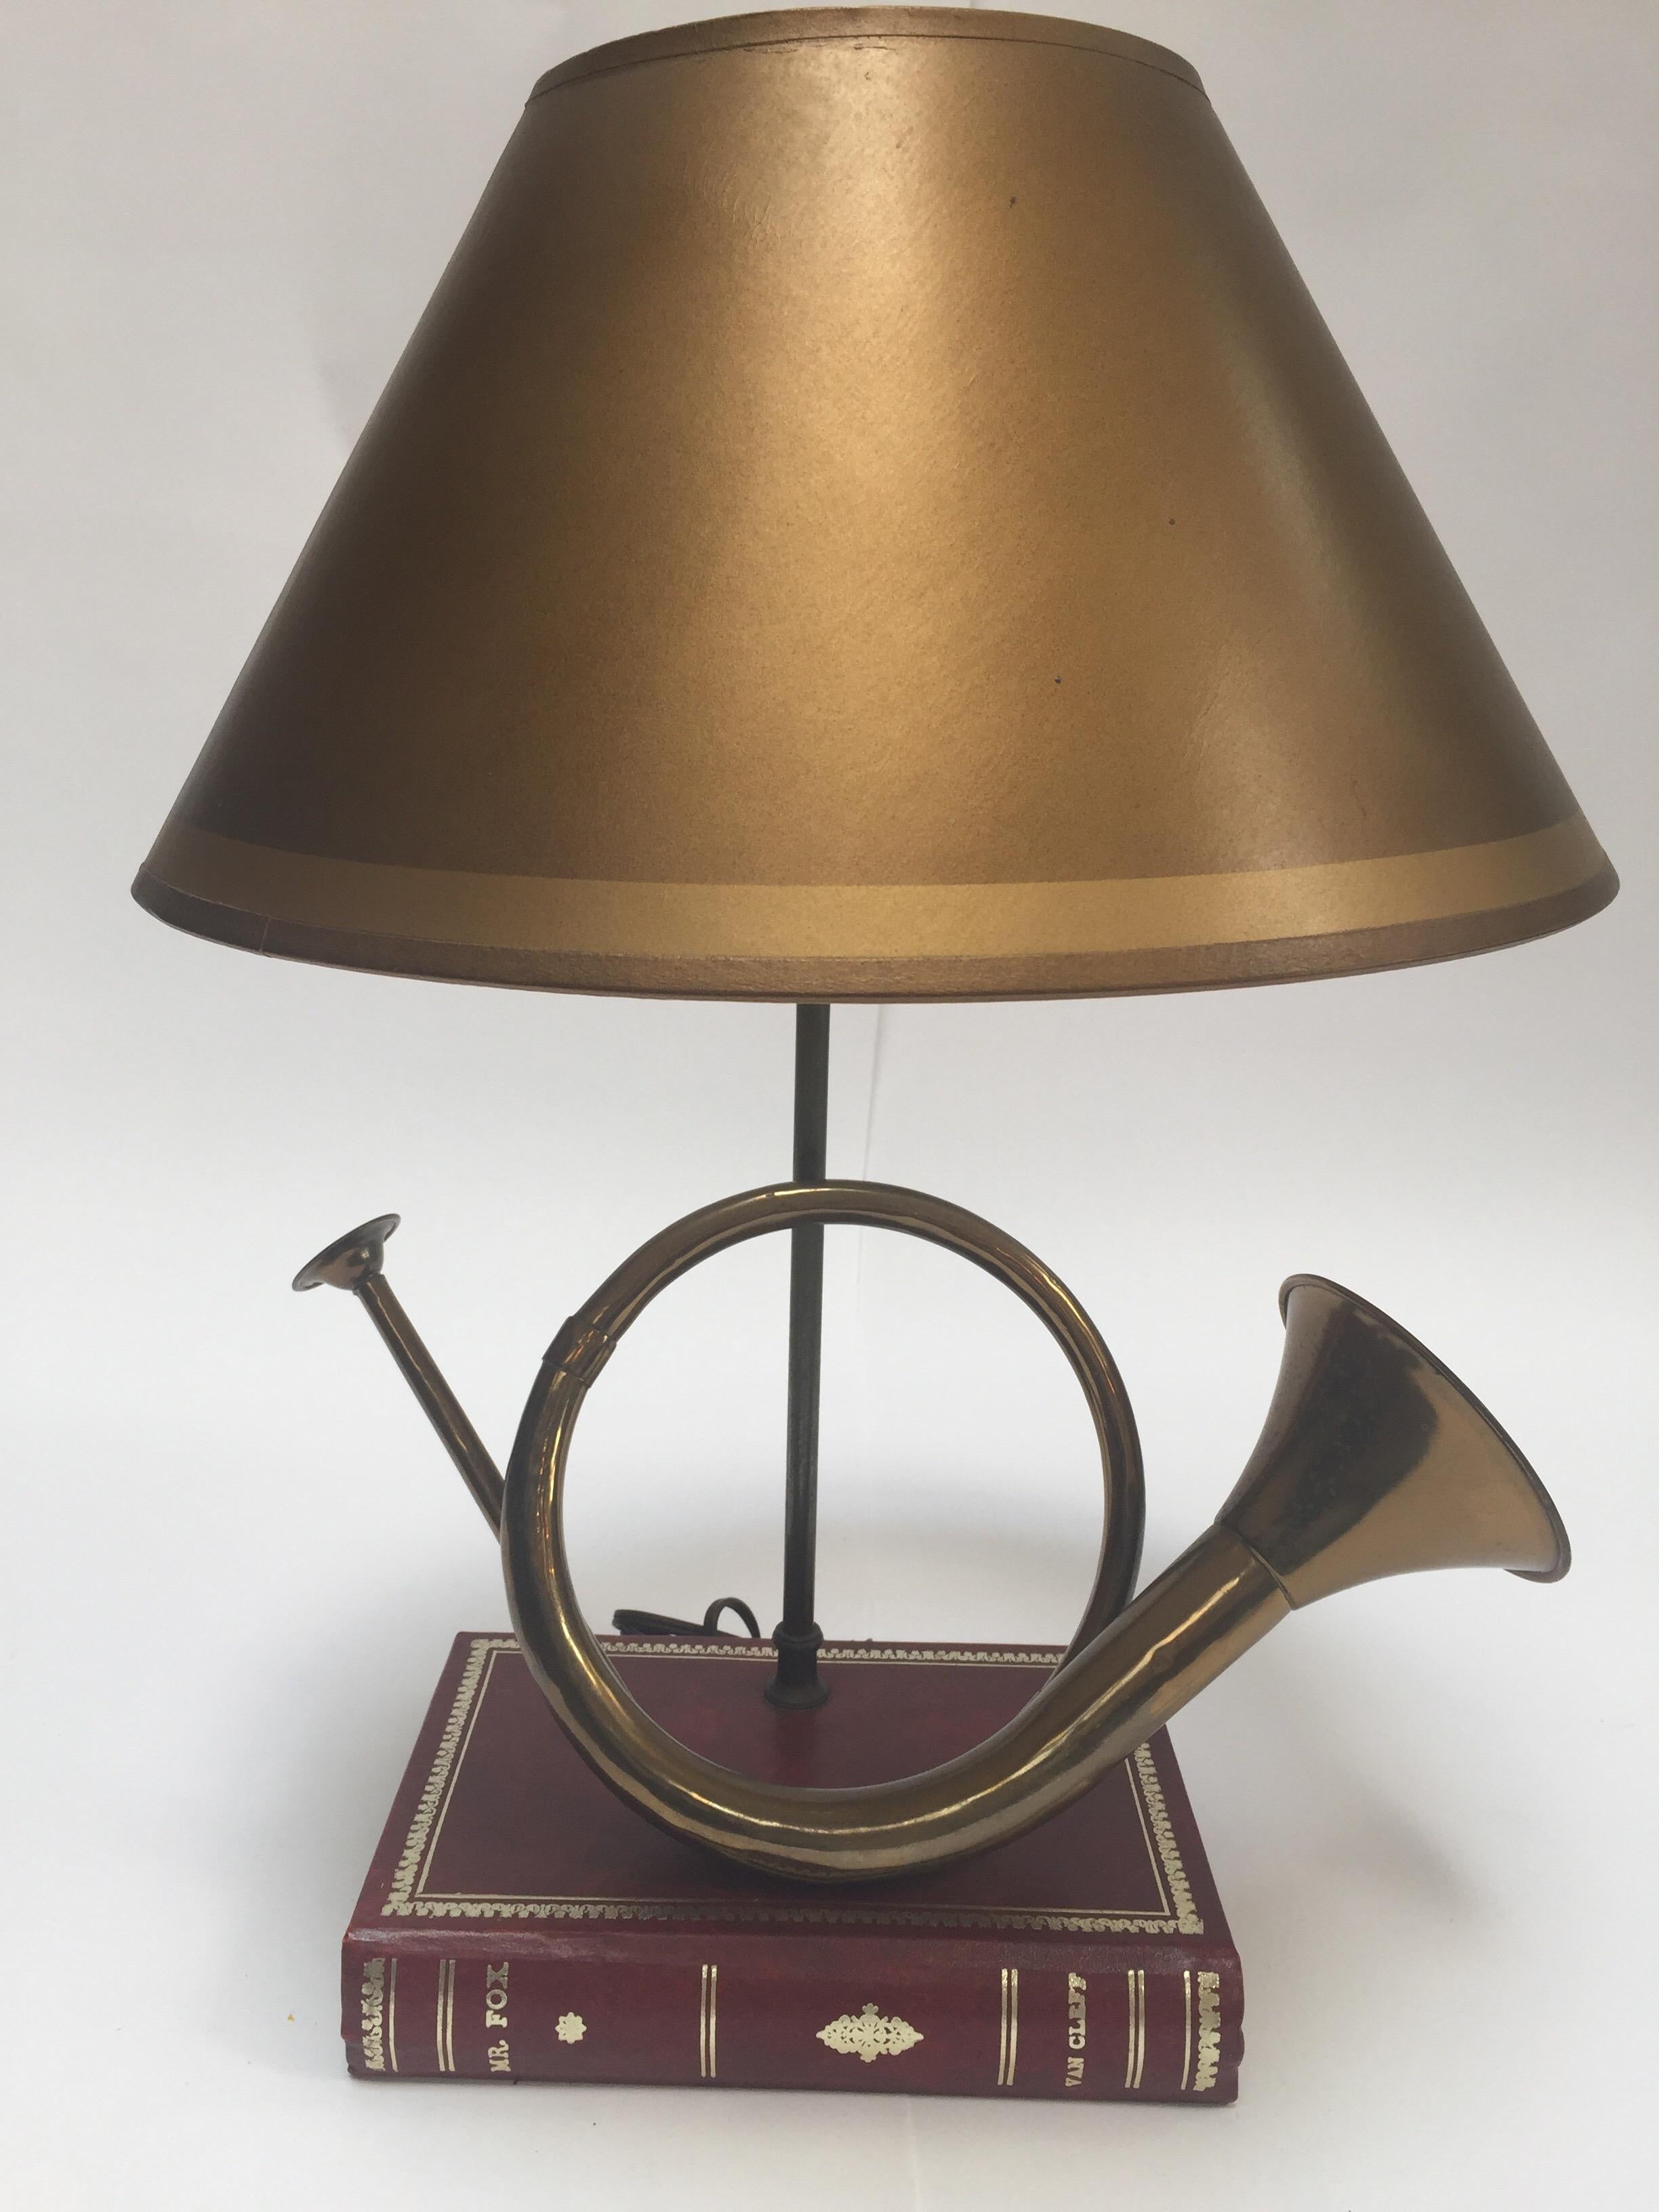 Vintage brass looped hunter's bugle made into a table lamp.
handcrafted Robert Abbey table lamp.
Vintage decorative brass hunting horns, British horn bugle, or military brass Instrument made into a table lamp.
The brass decorative horn sit on a